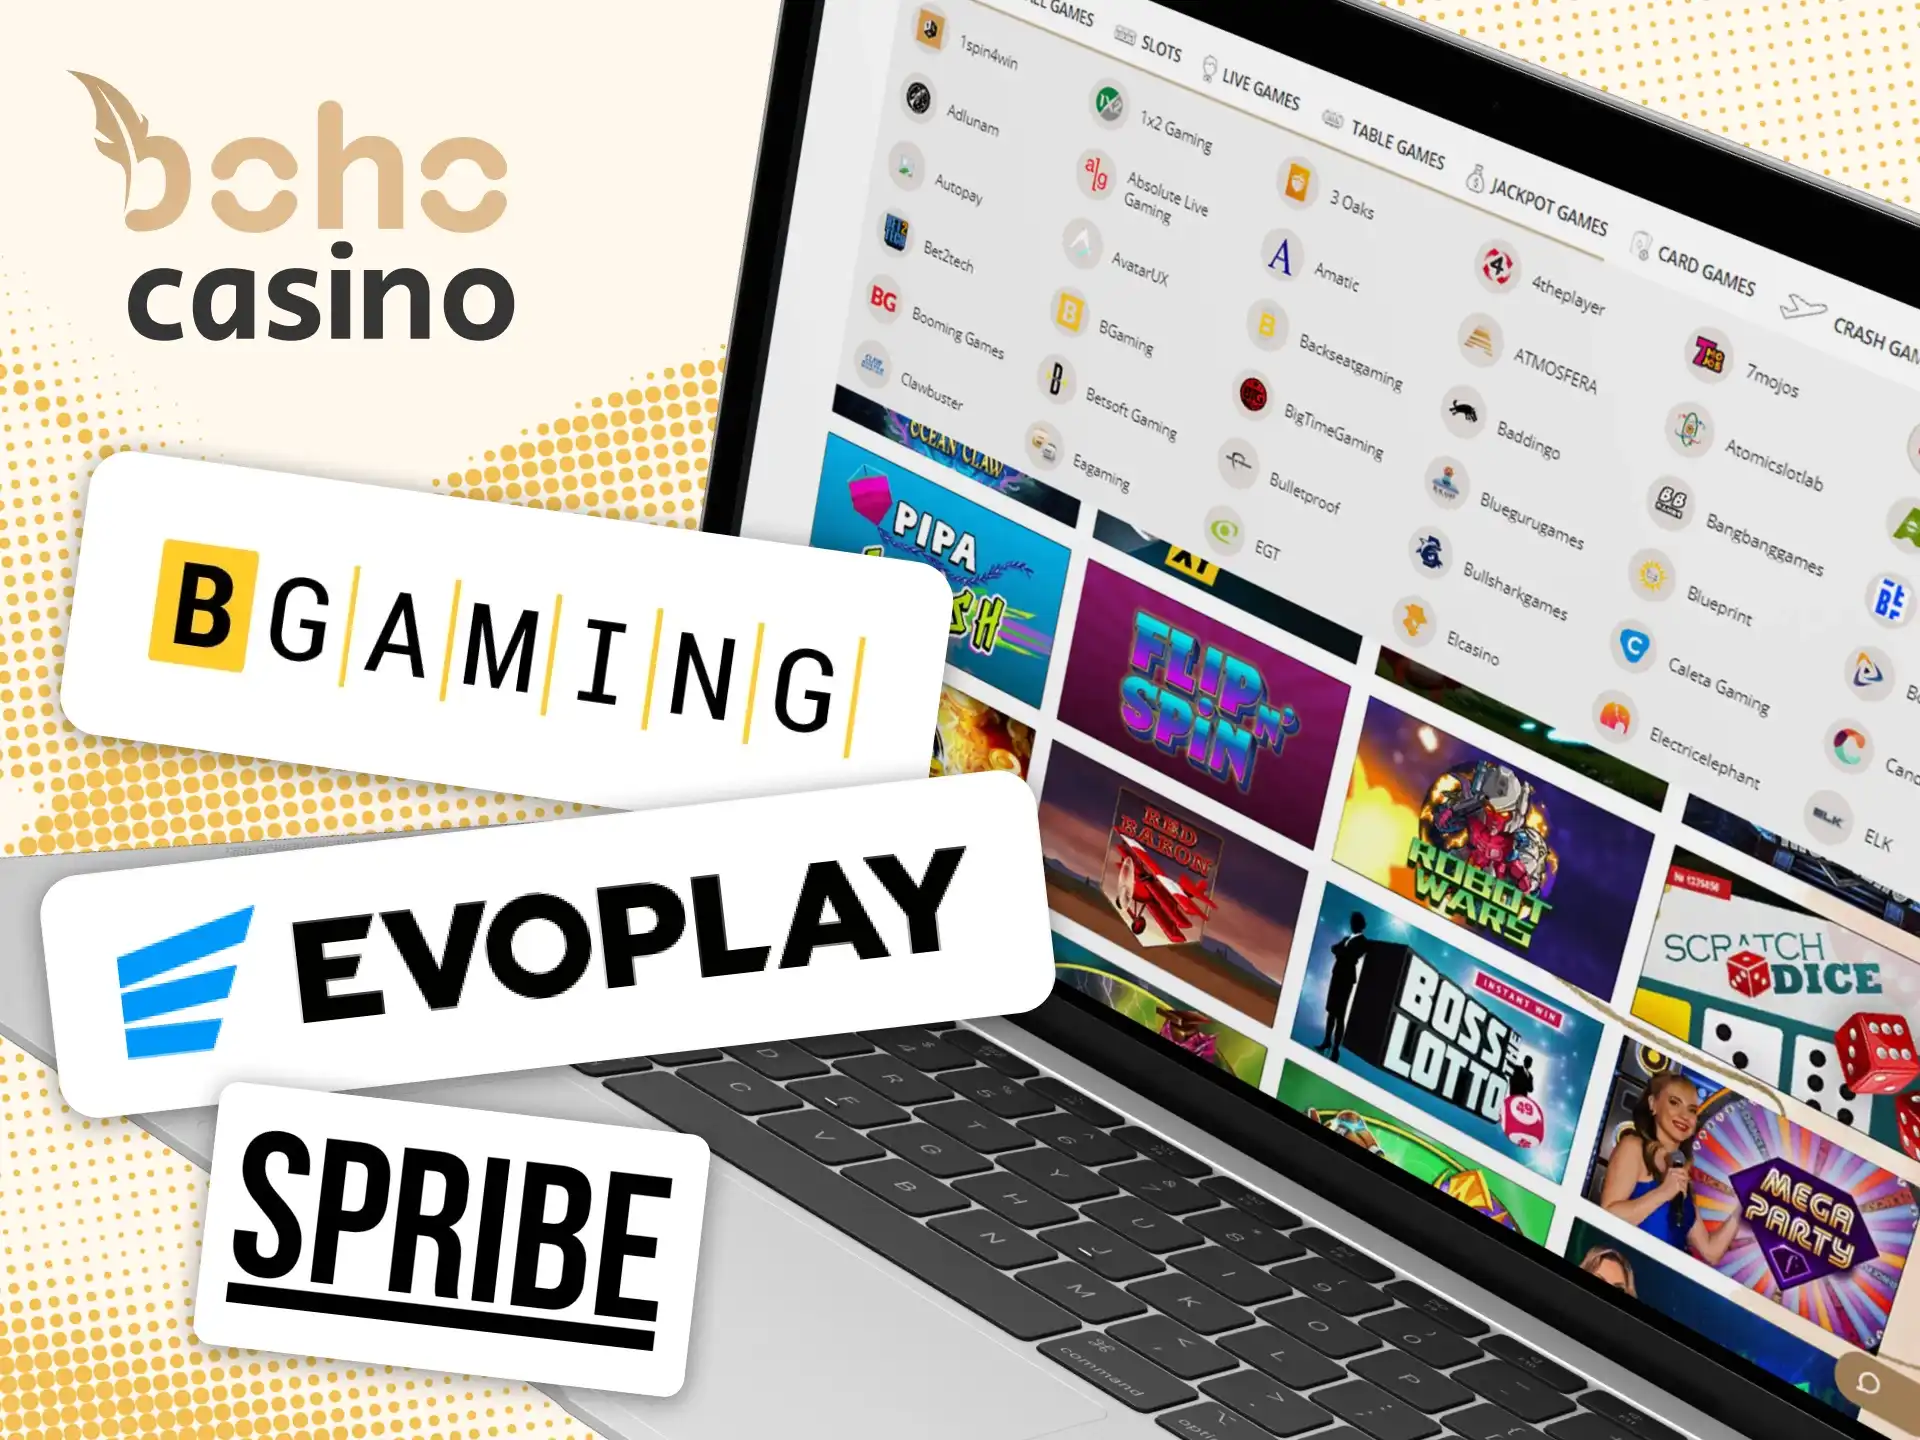 Boho Casino works only with reliable providers of mini games.